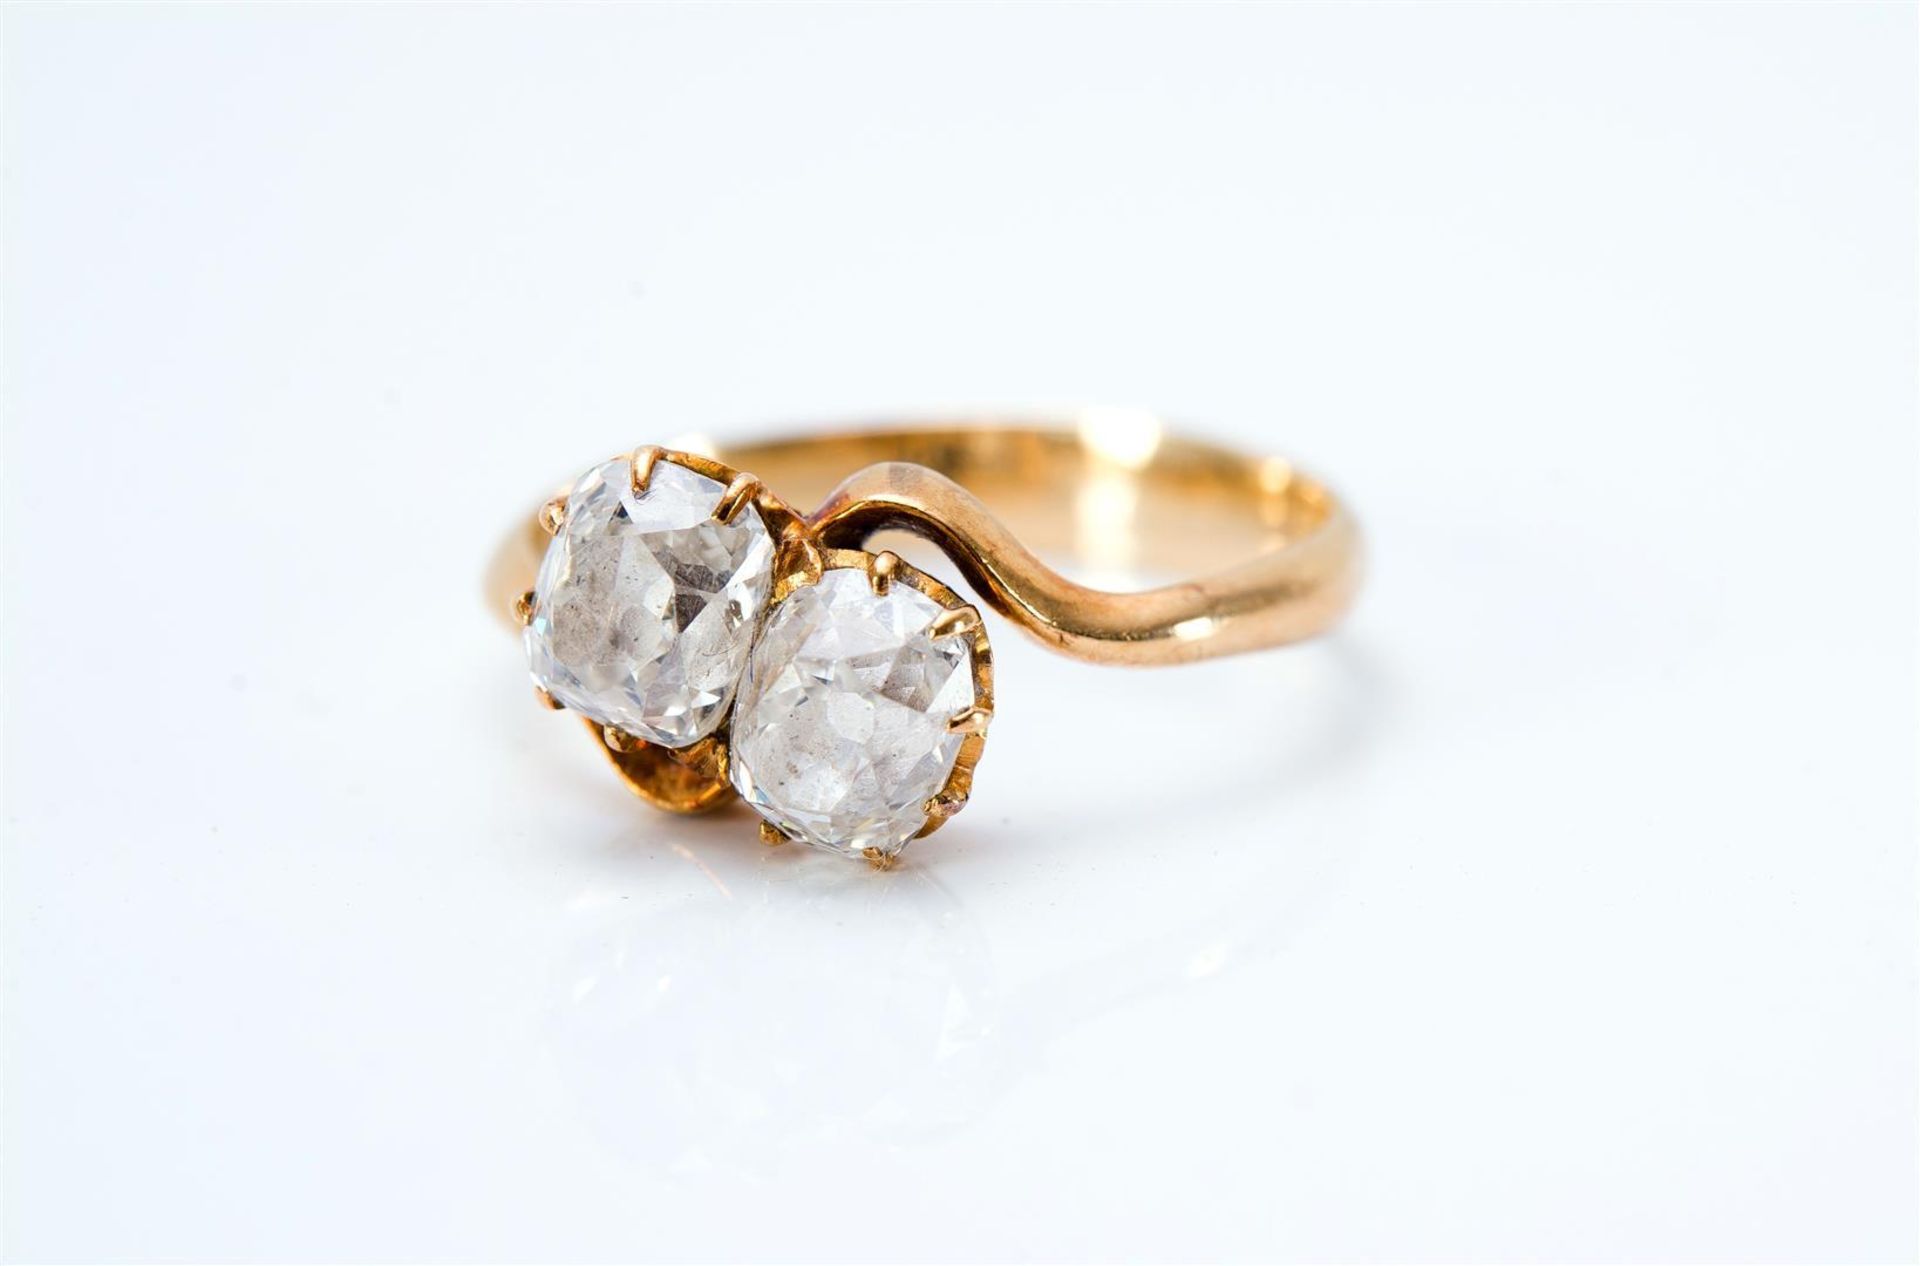 A 14-kt golden ring set with two diamonds of approx. 0.36 ct. each. Size 52 and 5-3/4. Total weight - Image 5 of 5